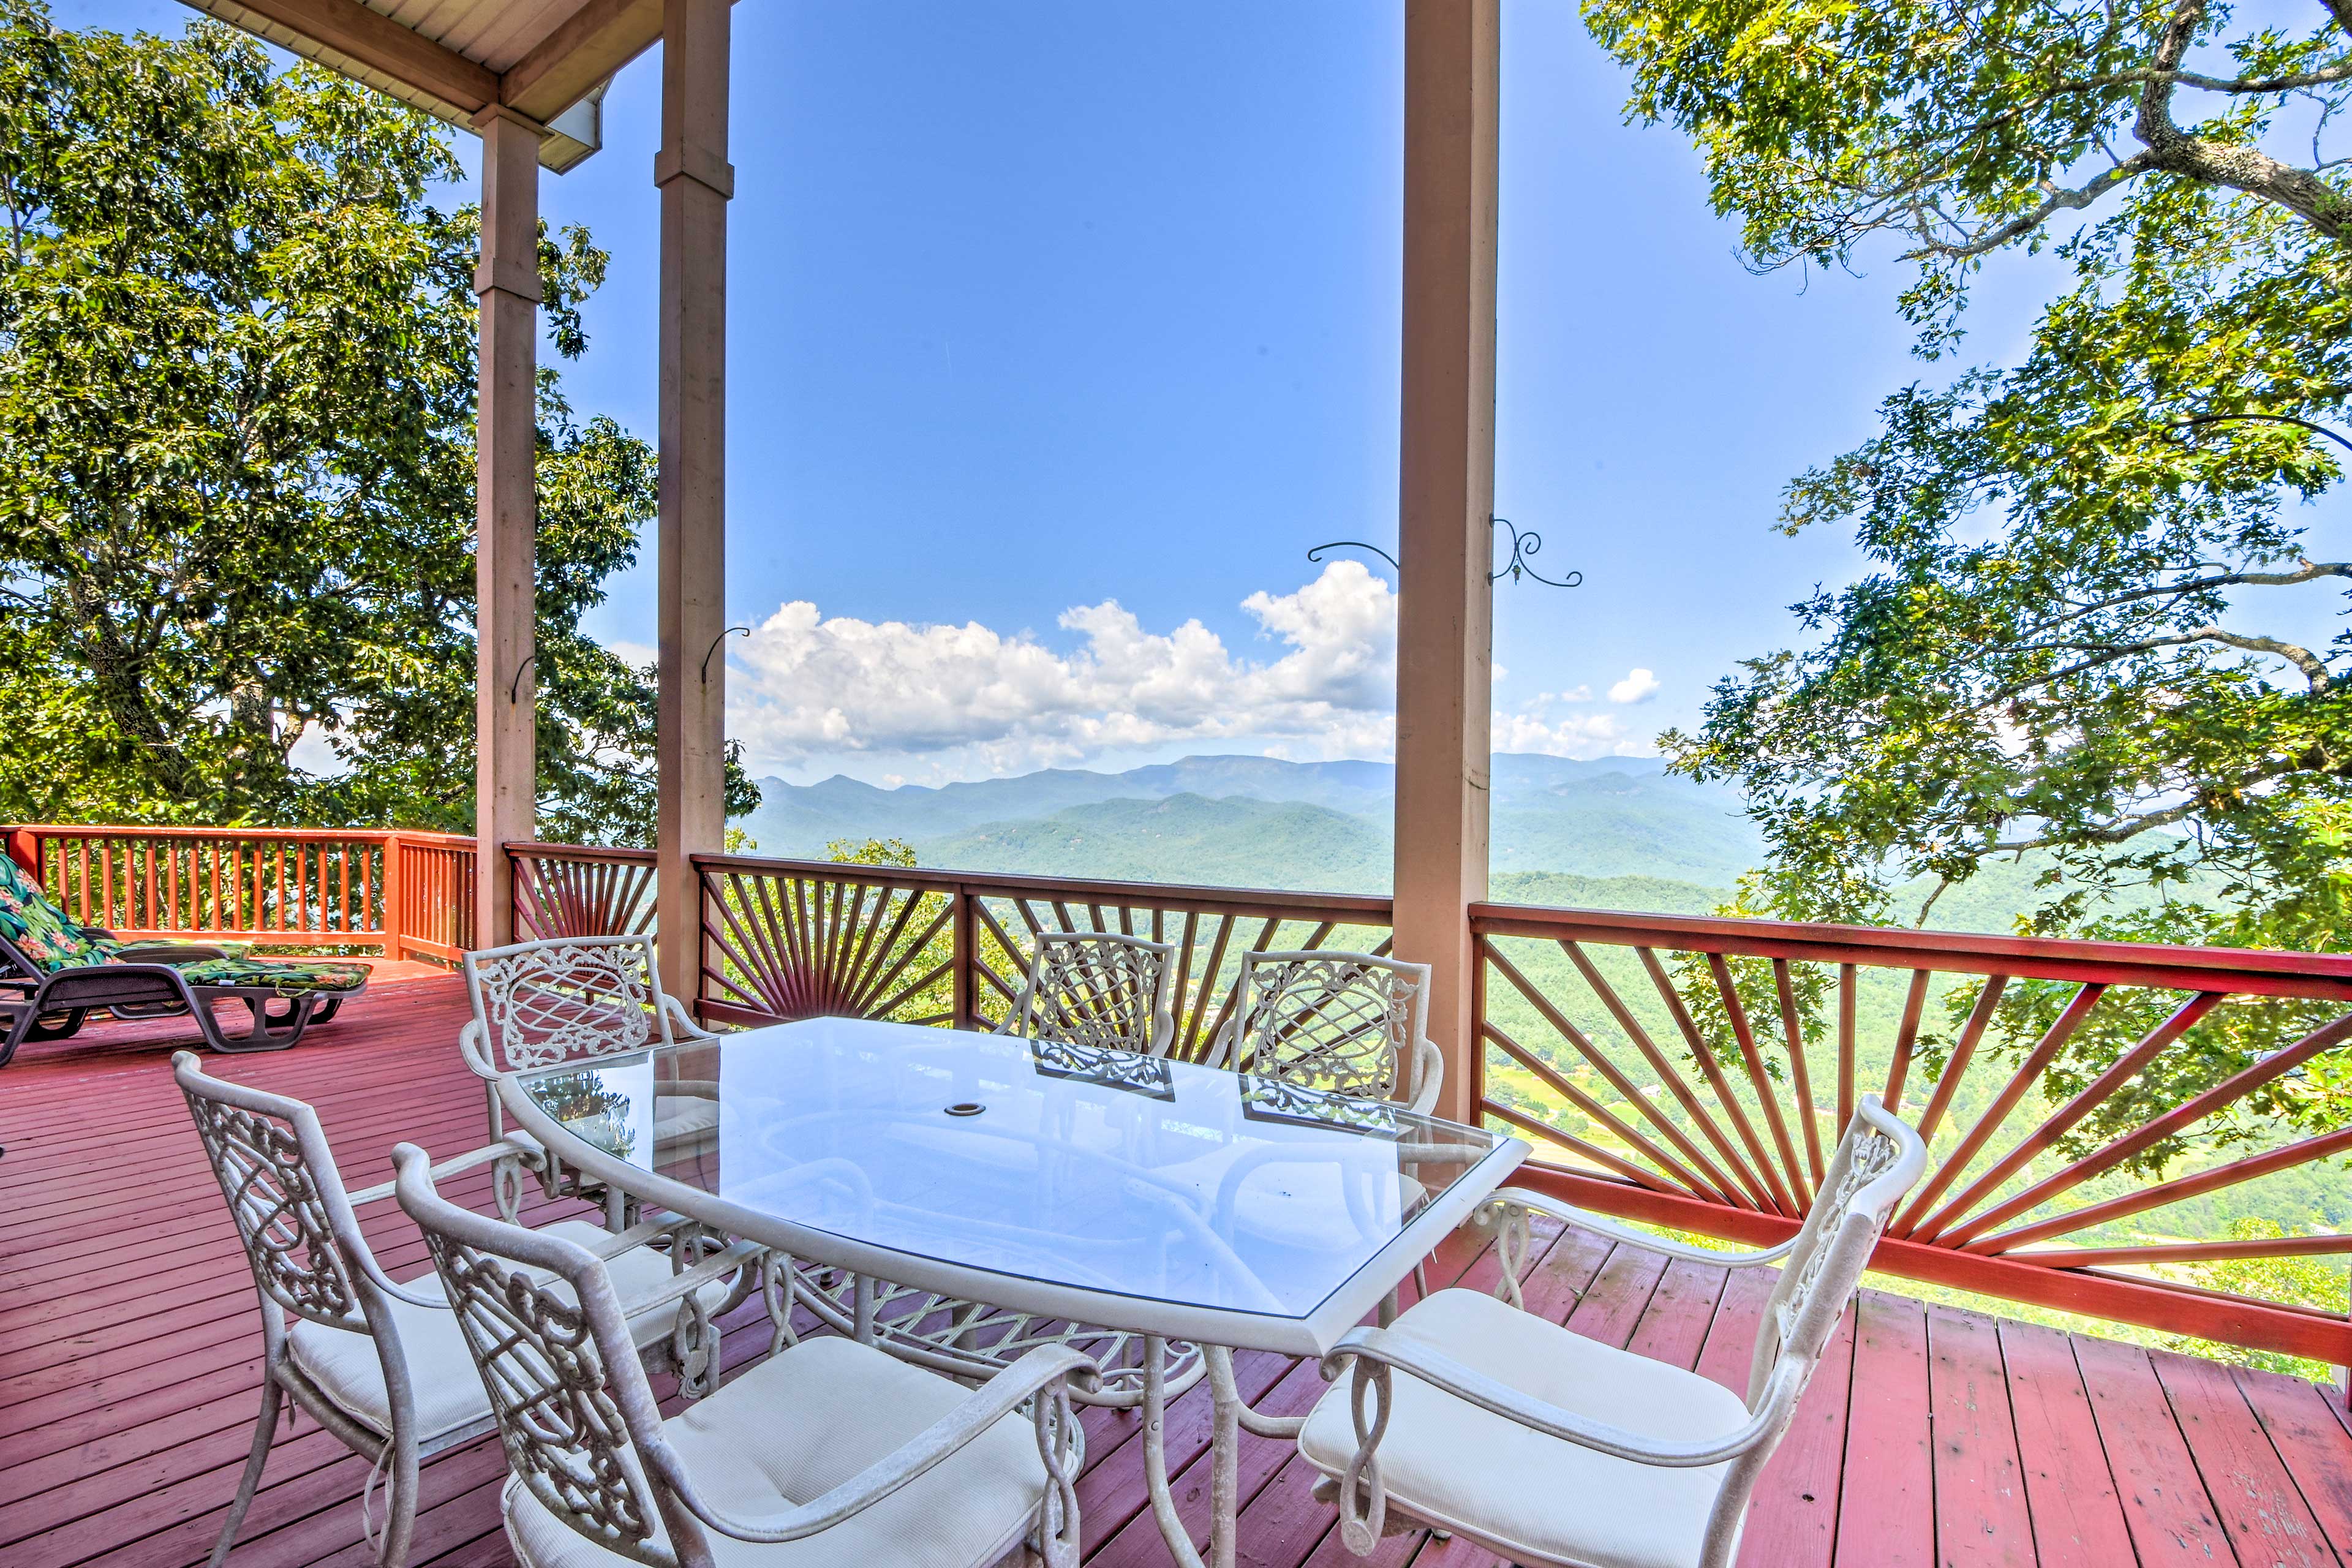 Covered Deck | Outdoor Dining | Mountain Views